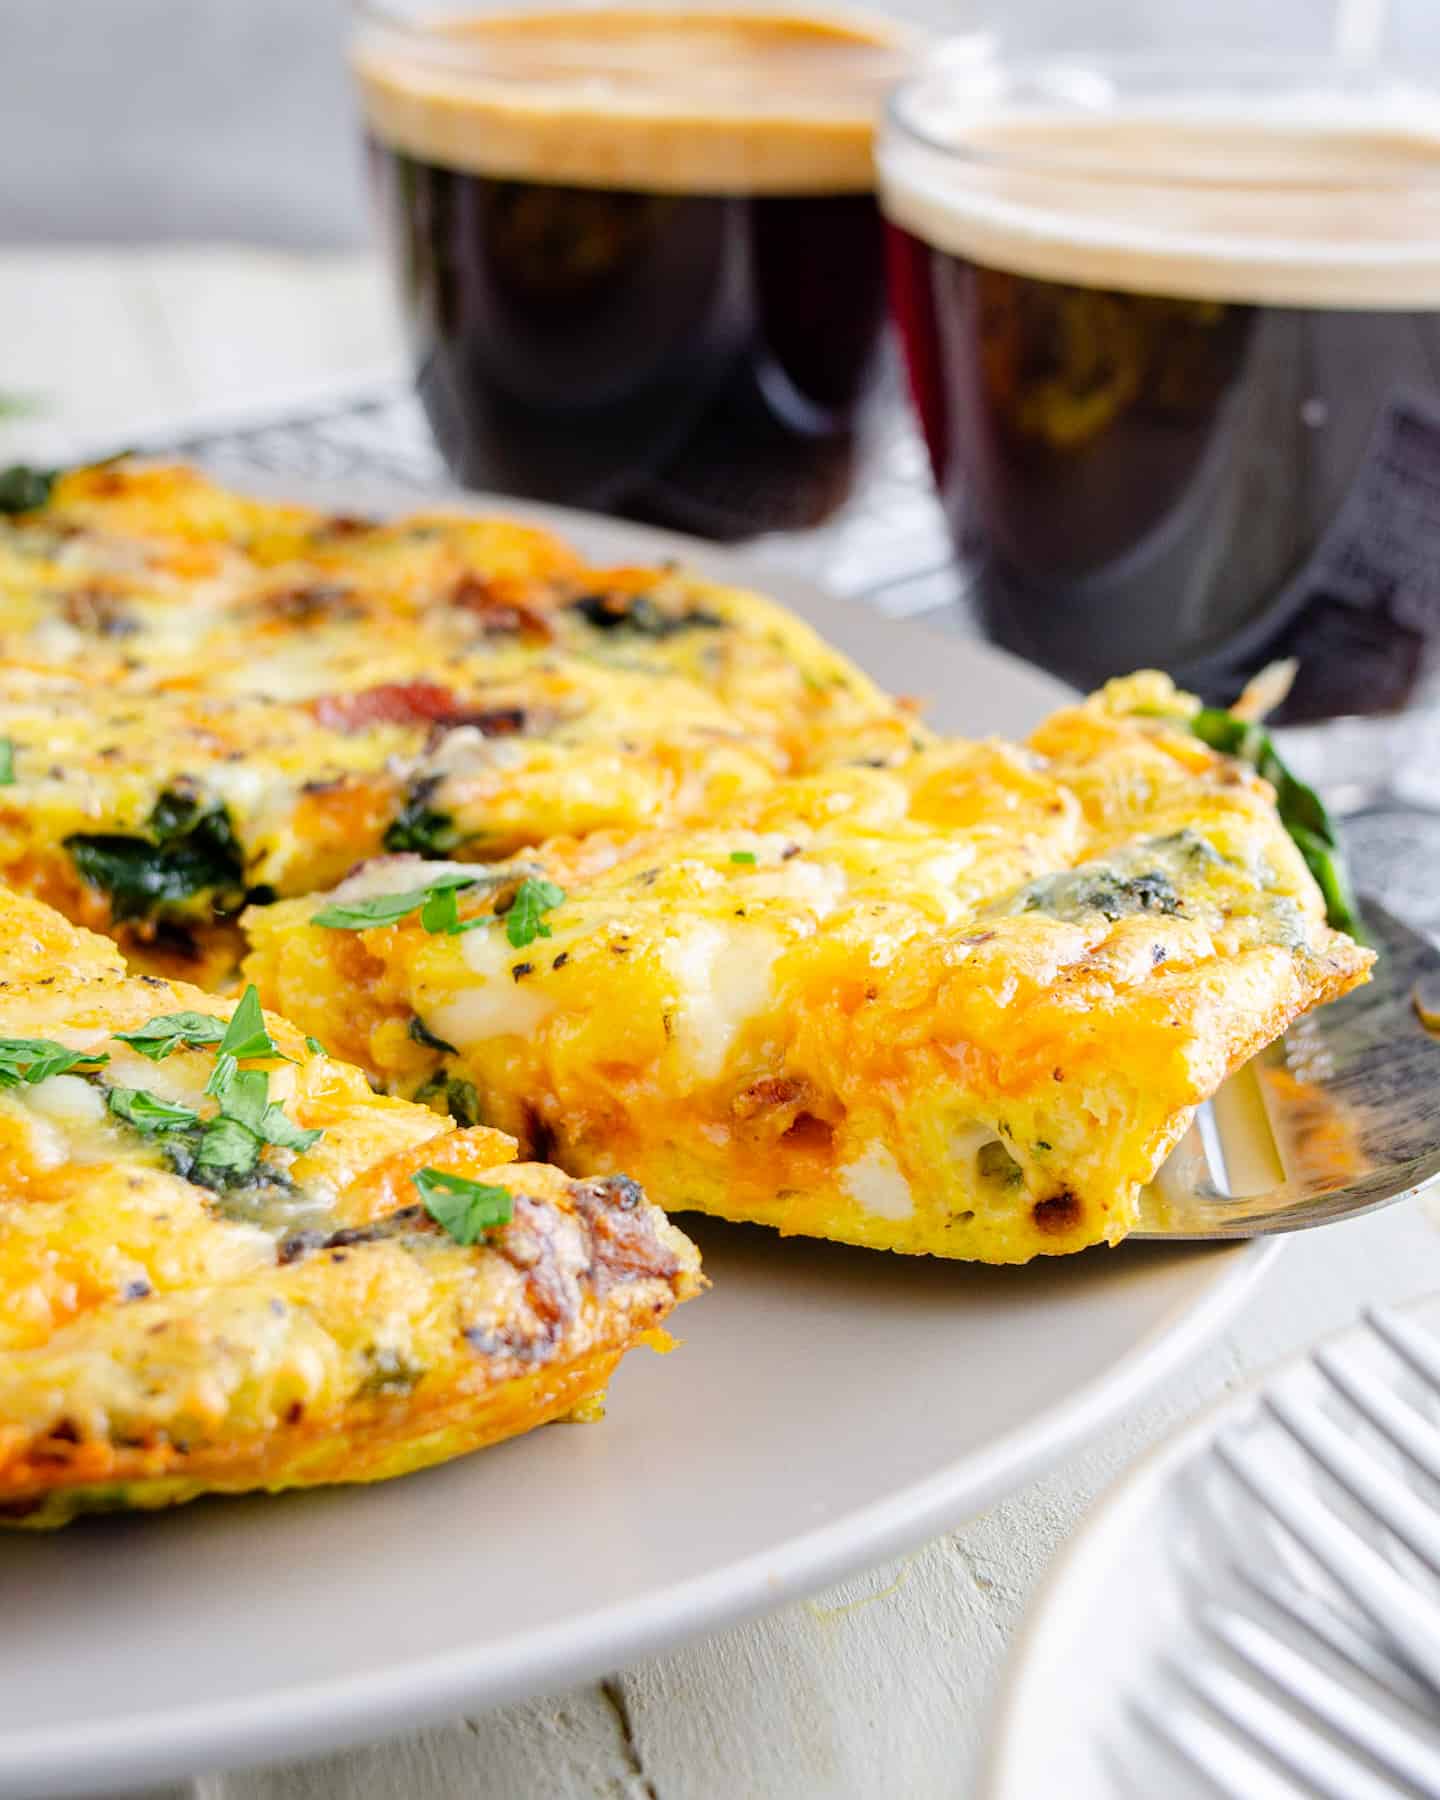 A slice of baked frittata with lattes in the background.